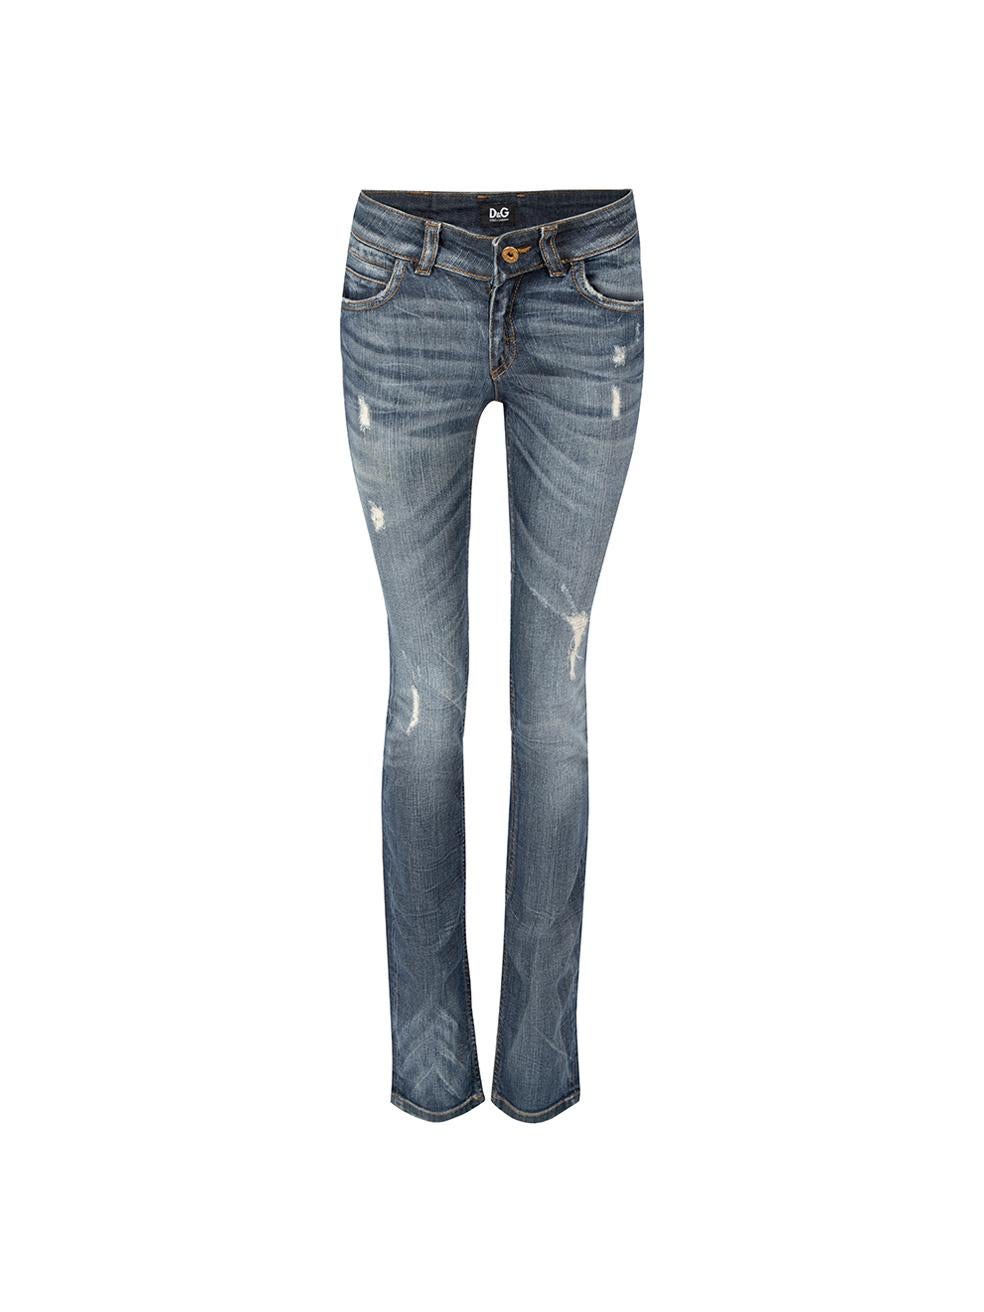 Dolce & Gabbana Blue Stone Wash Distressed Jeans Size XS For Sale